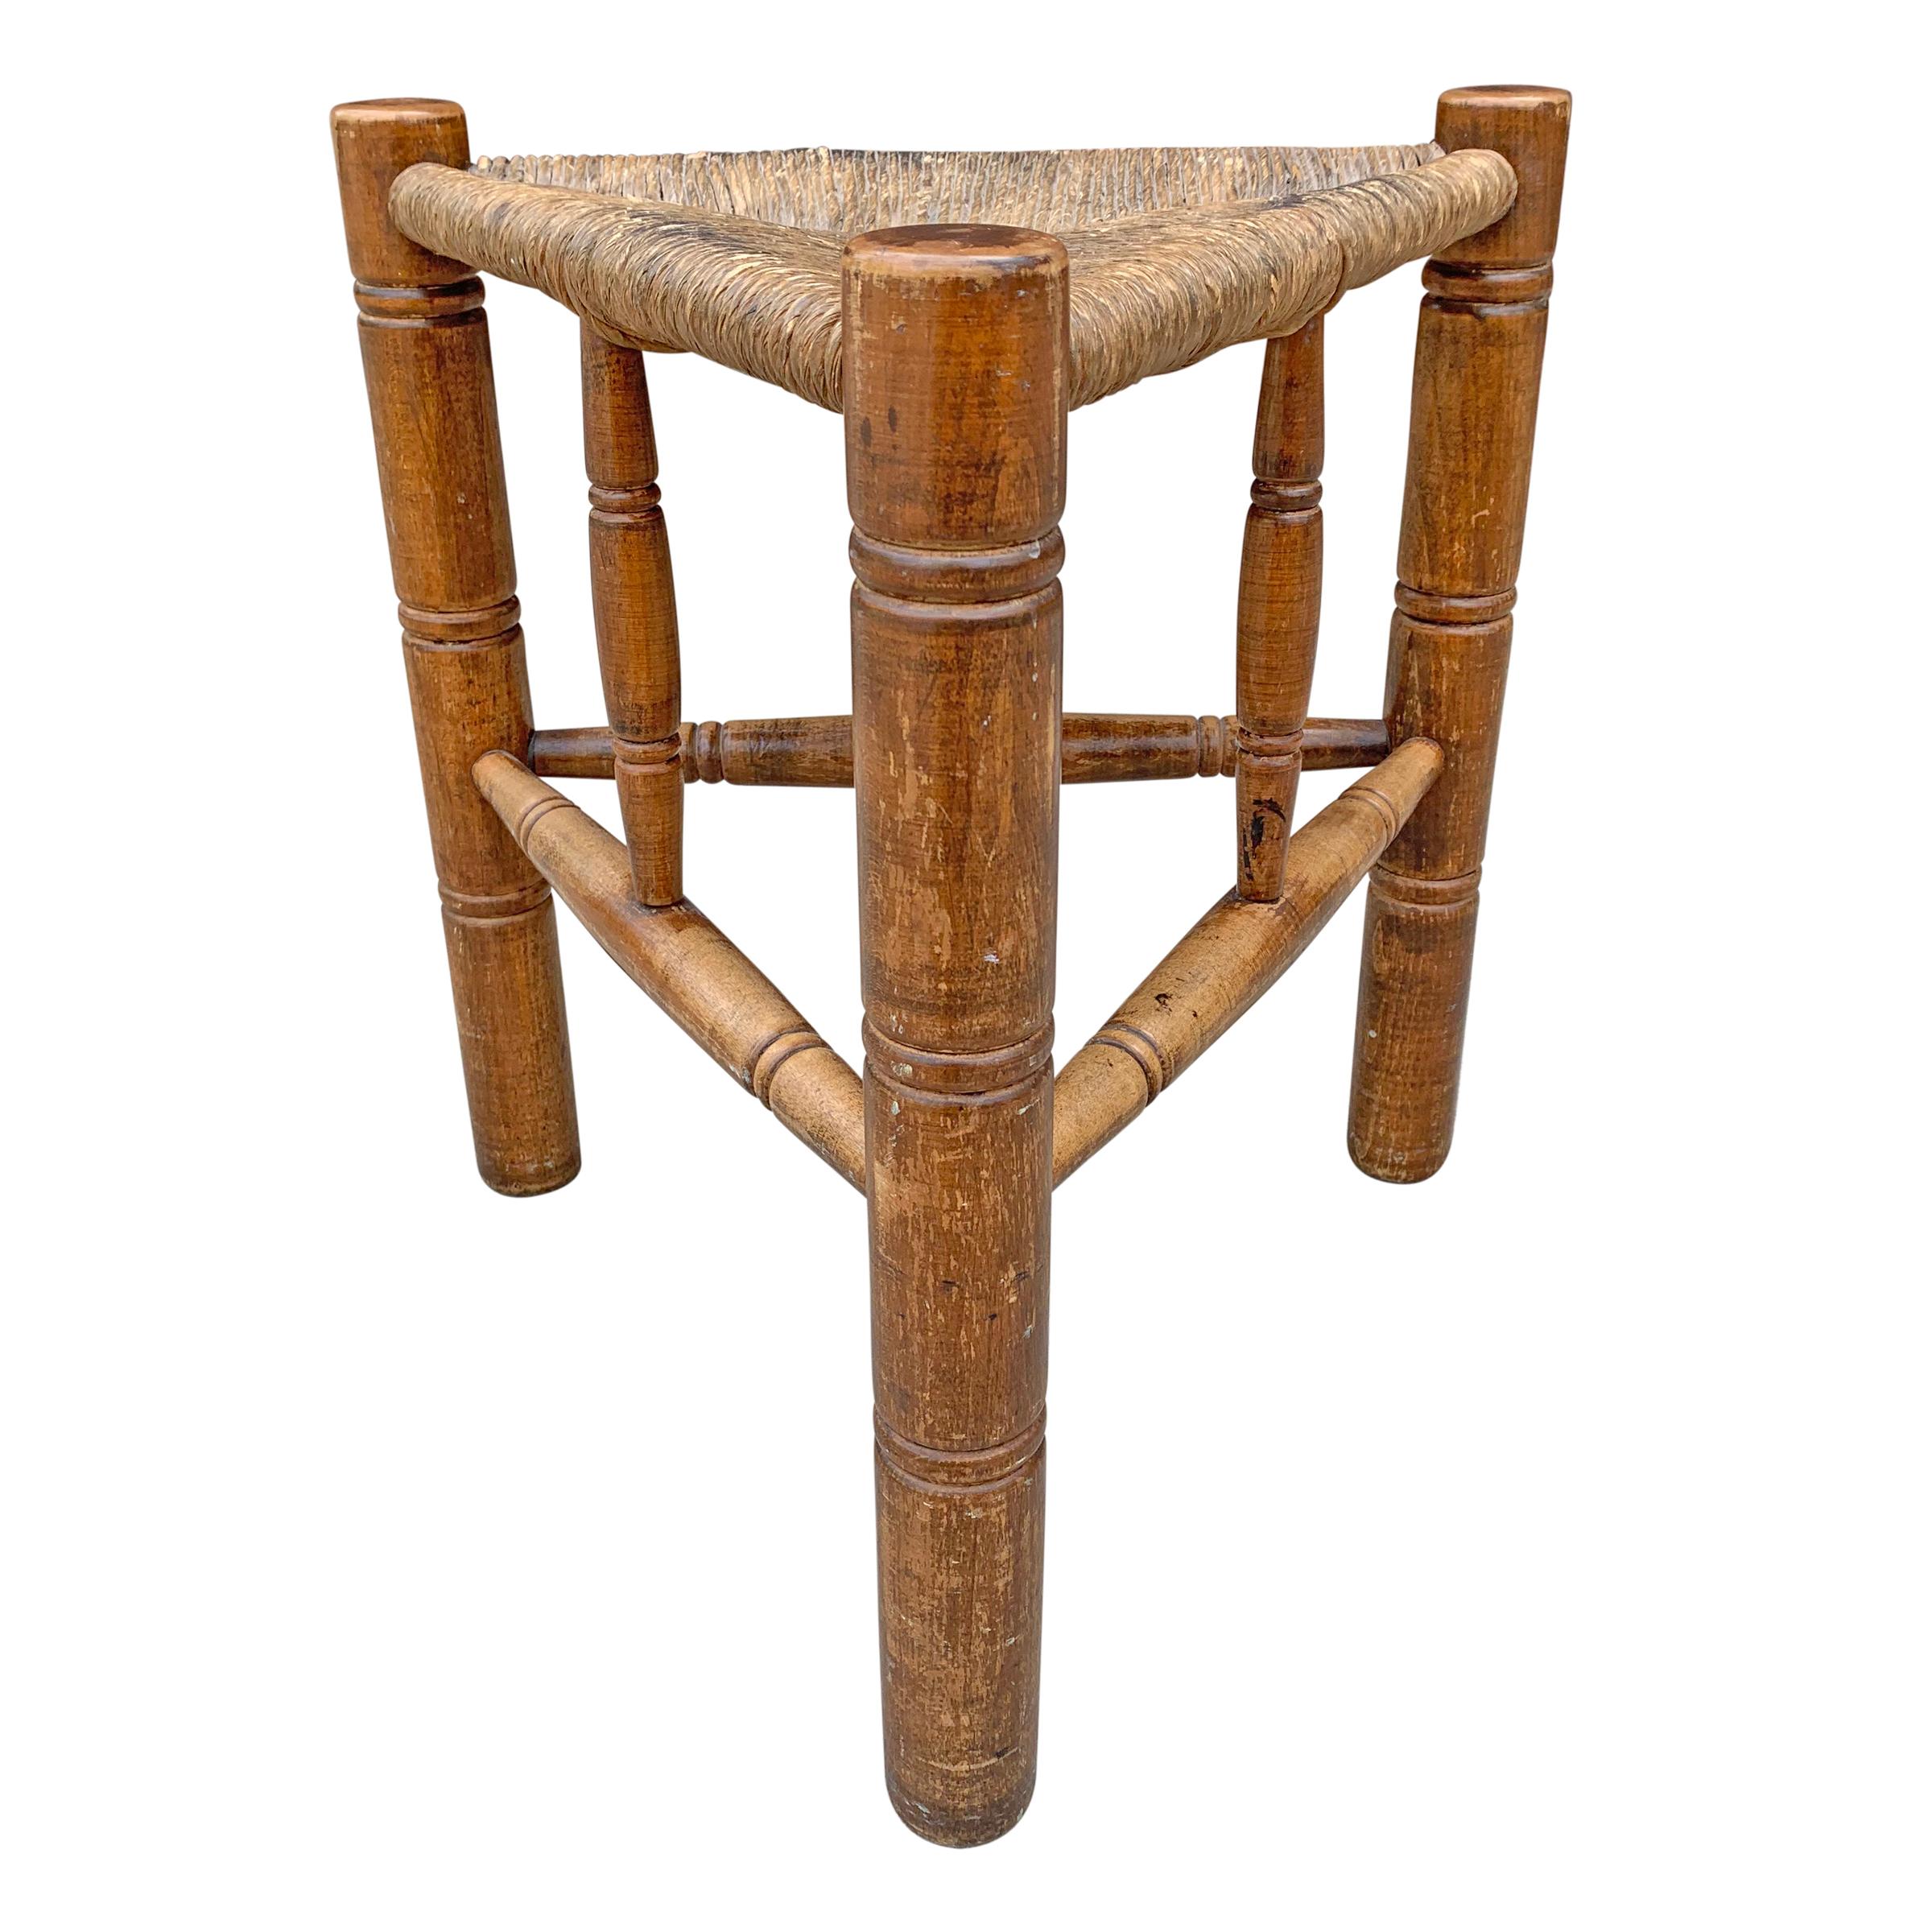 A wonderful early 20th century American three-legged stool with turned legs and stretchers, and a woven rush seat. Marked 